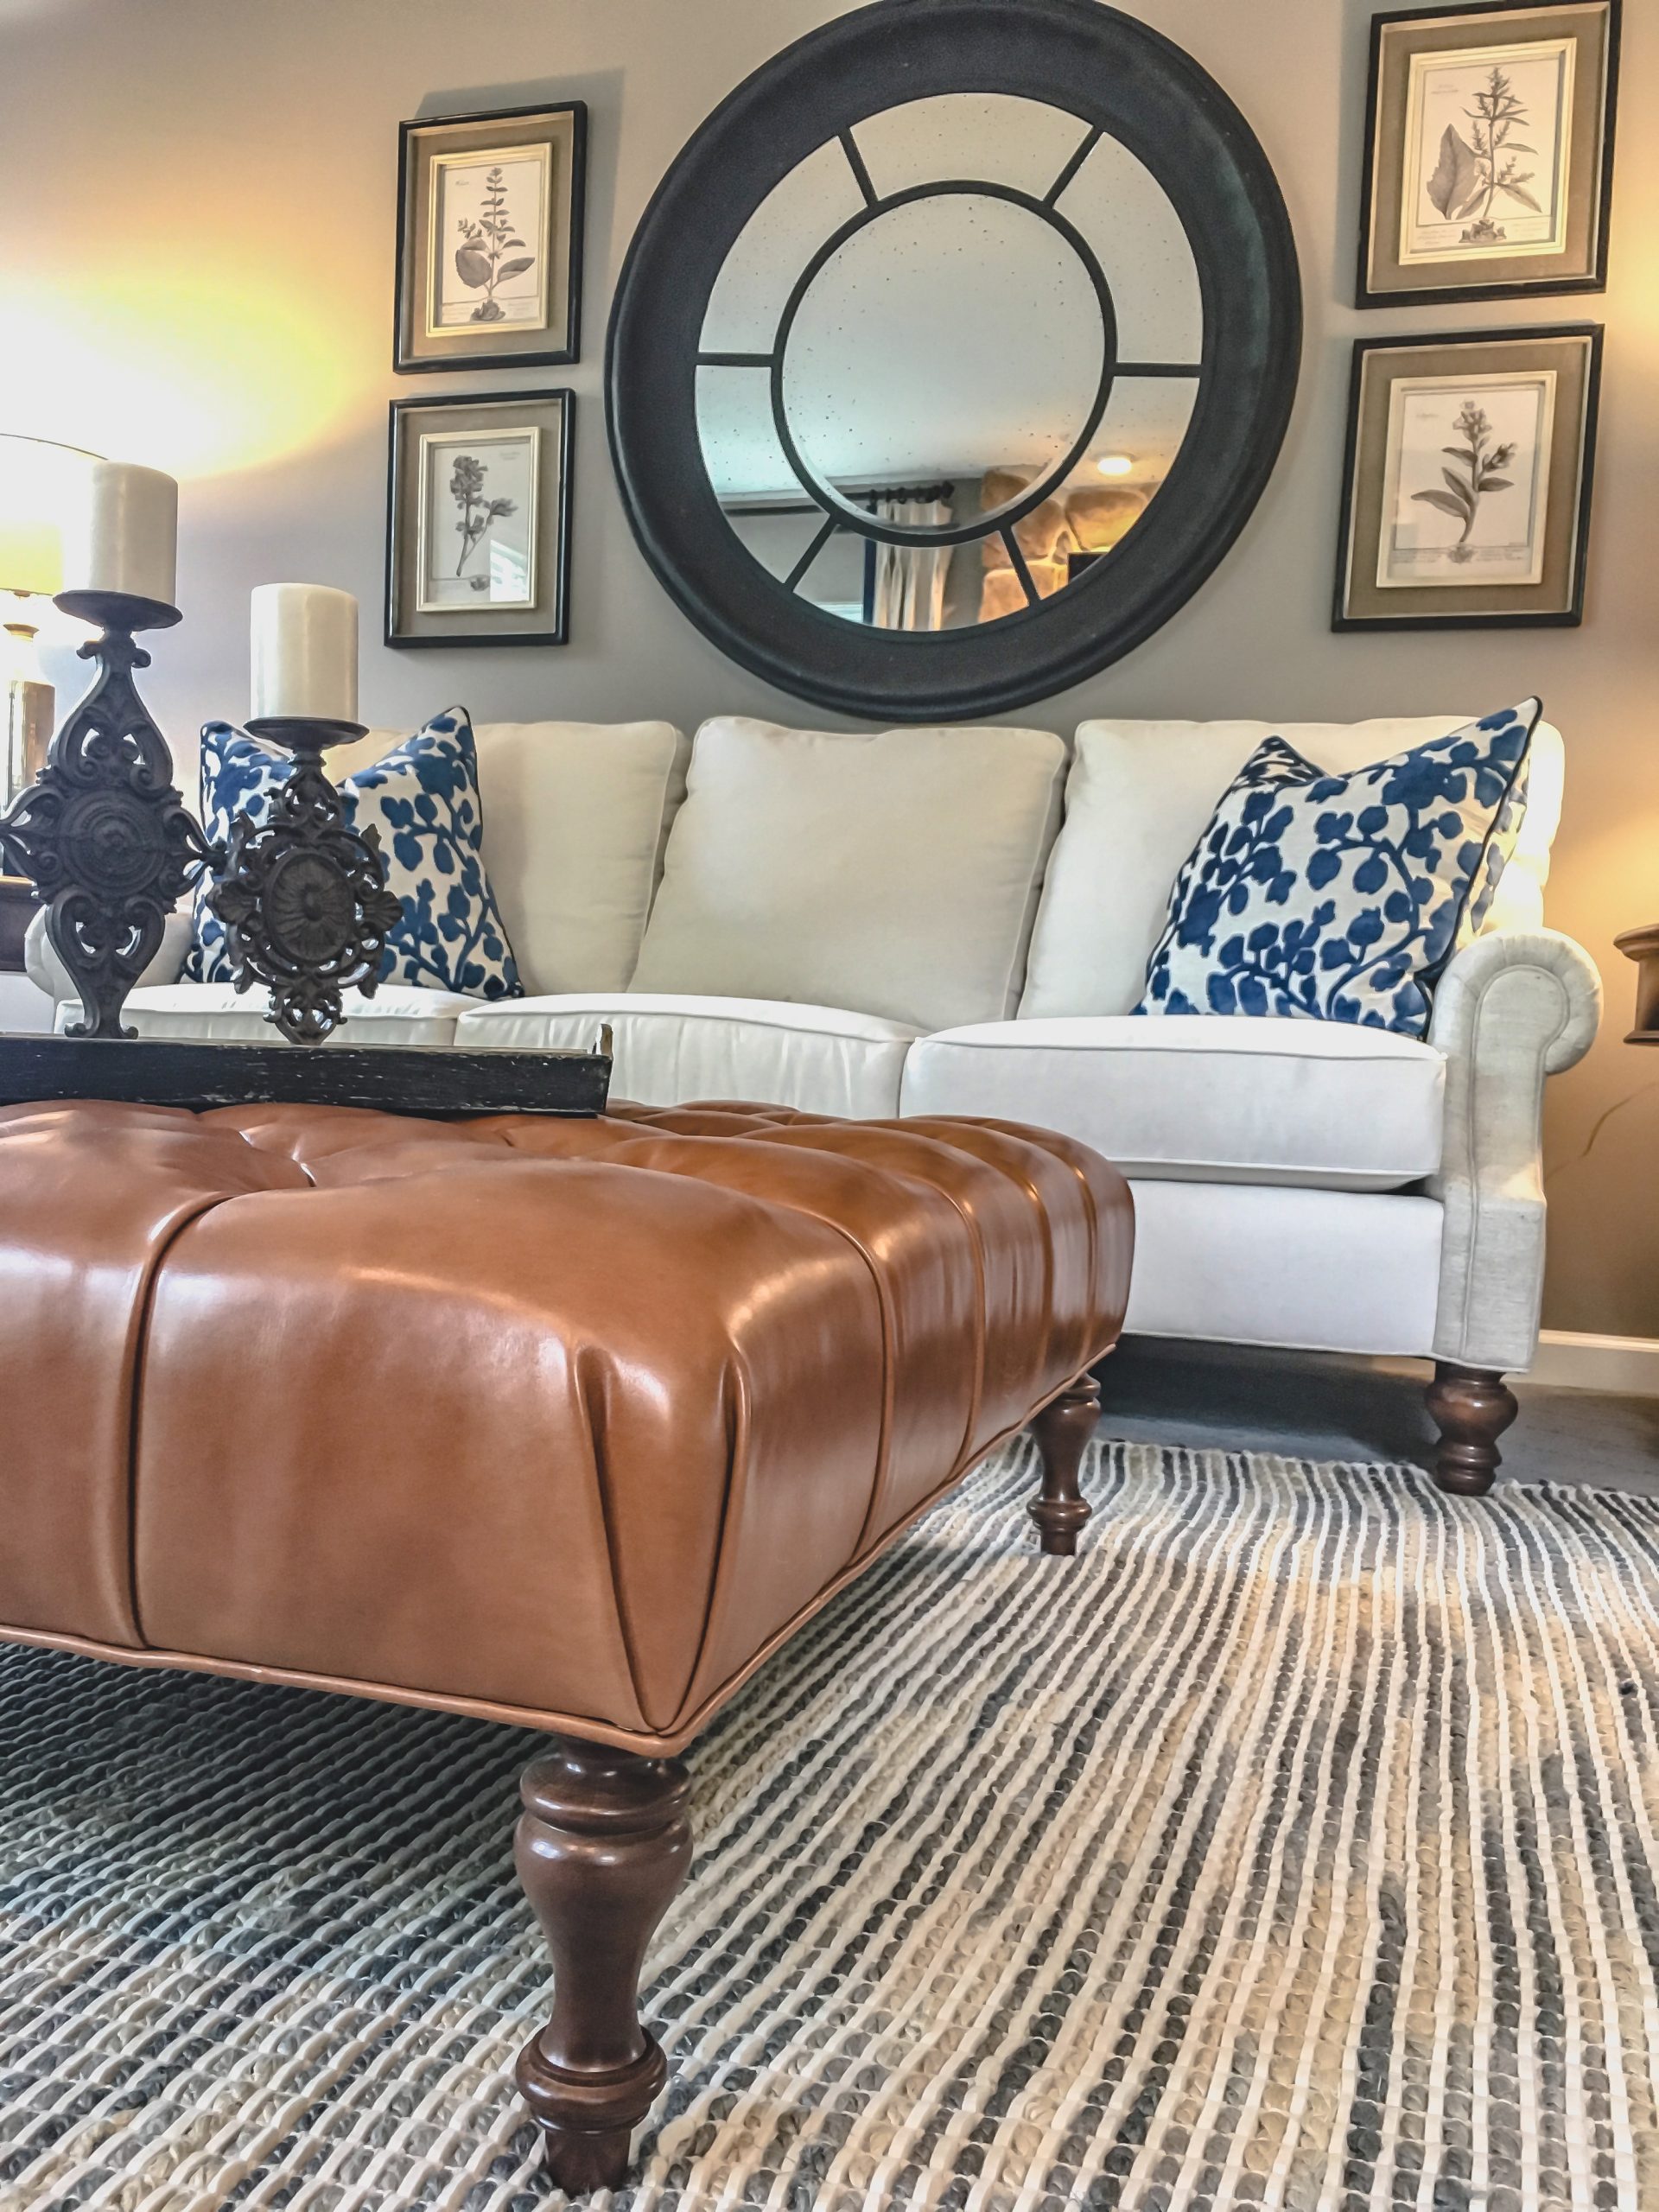 Leather Ottoman and Sofa from GailGray Home